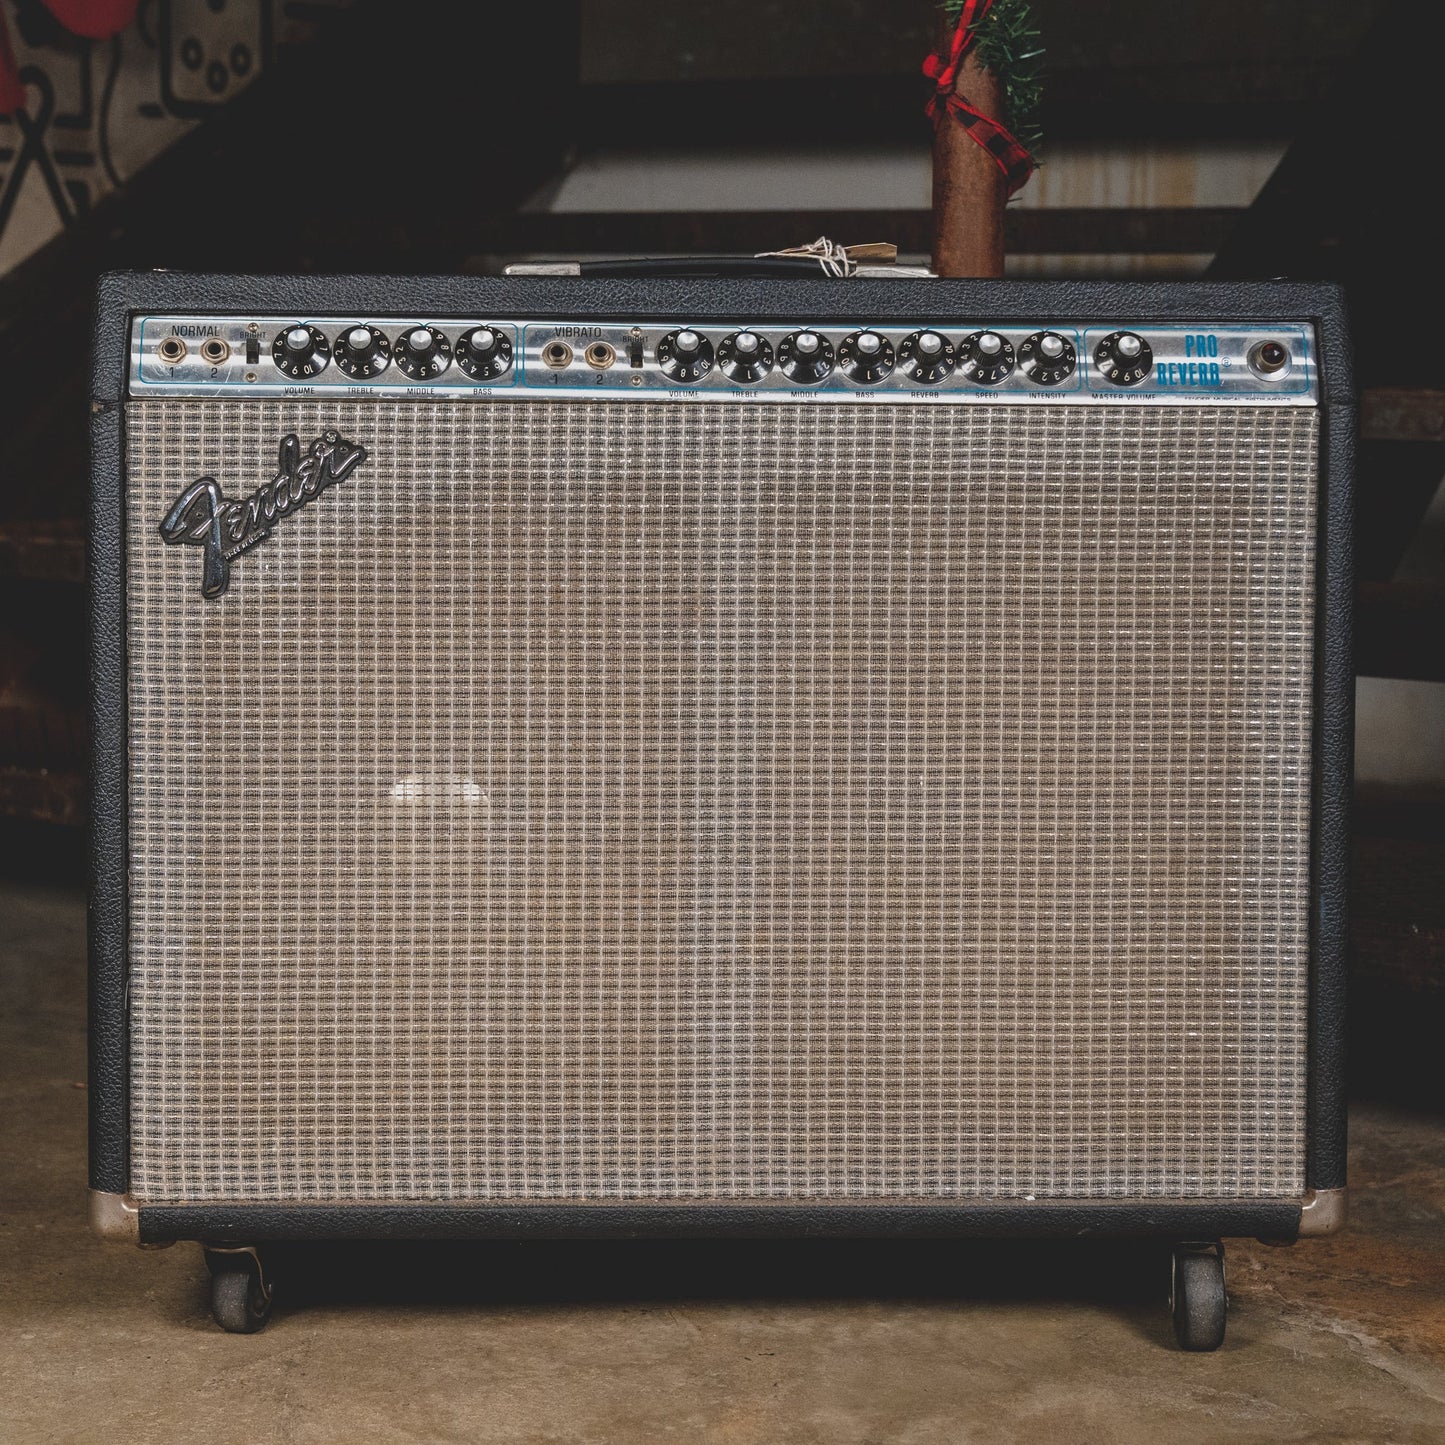 1980 Fender Pro Reverb Combo Amplifier, 70w 2x12 w/Cover - Used